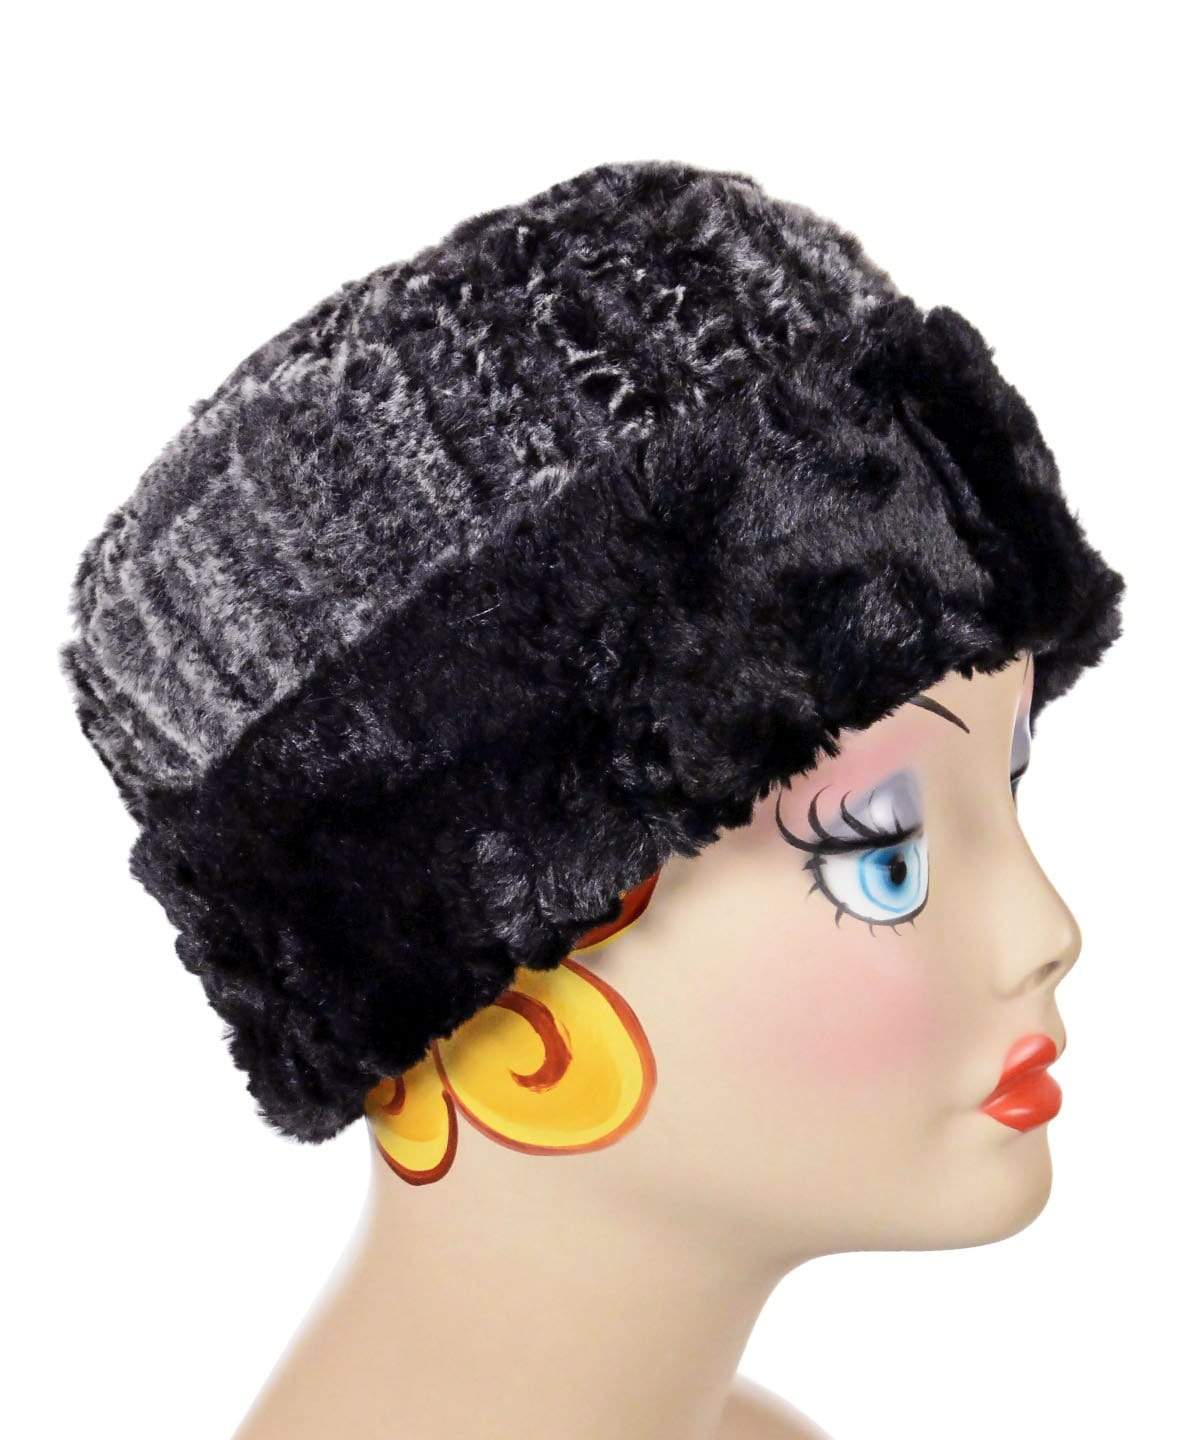   Women's Cuffed Pillbox on mannequin shown in reverse | Rattle ‘n’ Shake Faux Fur  with Cuddly Black | Handmade USA by Pandemonium Seattle